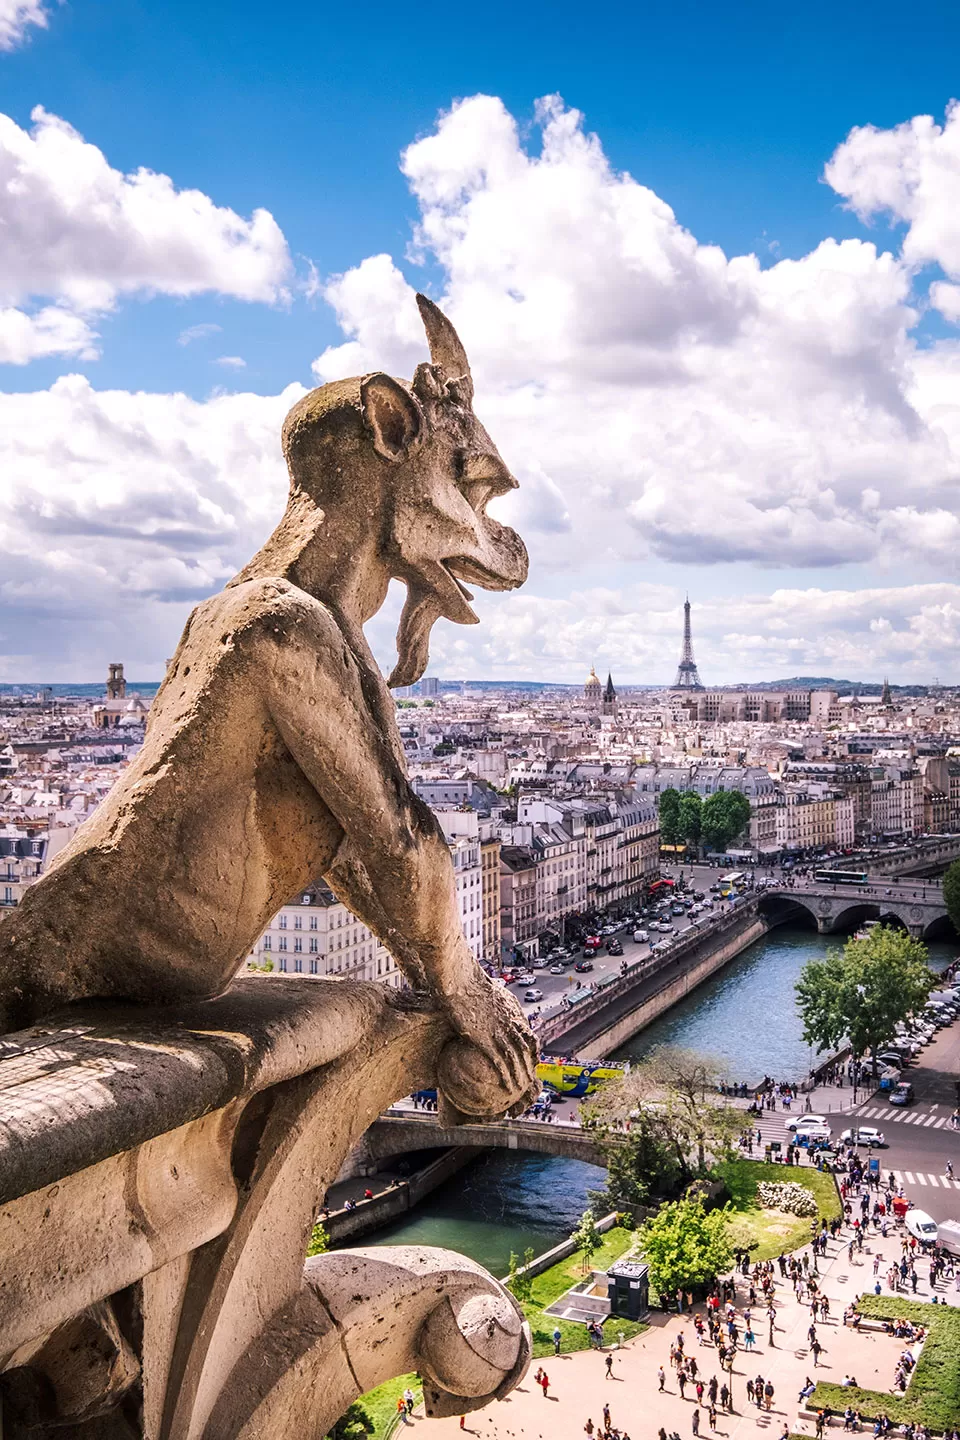 paris itinerary 4 days - what to do in paris in 4 days - view from notre dame